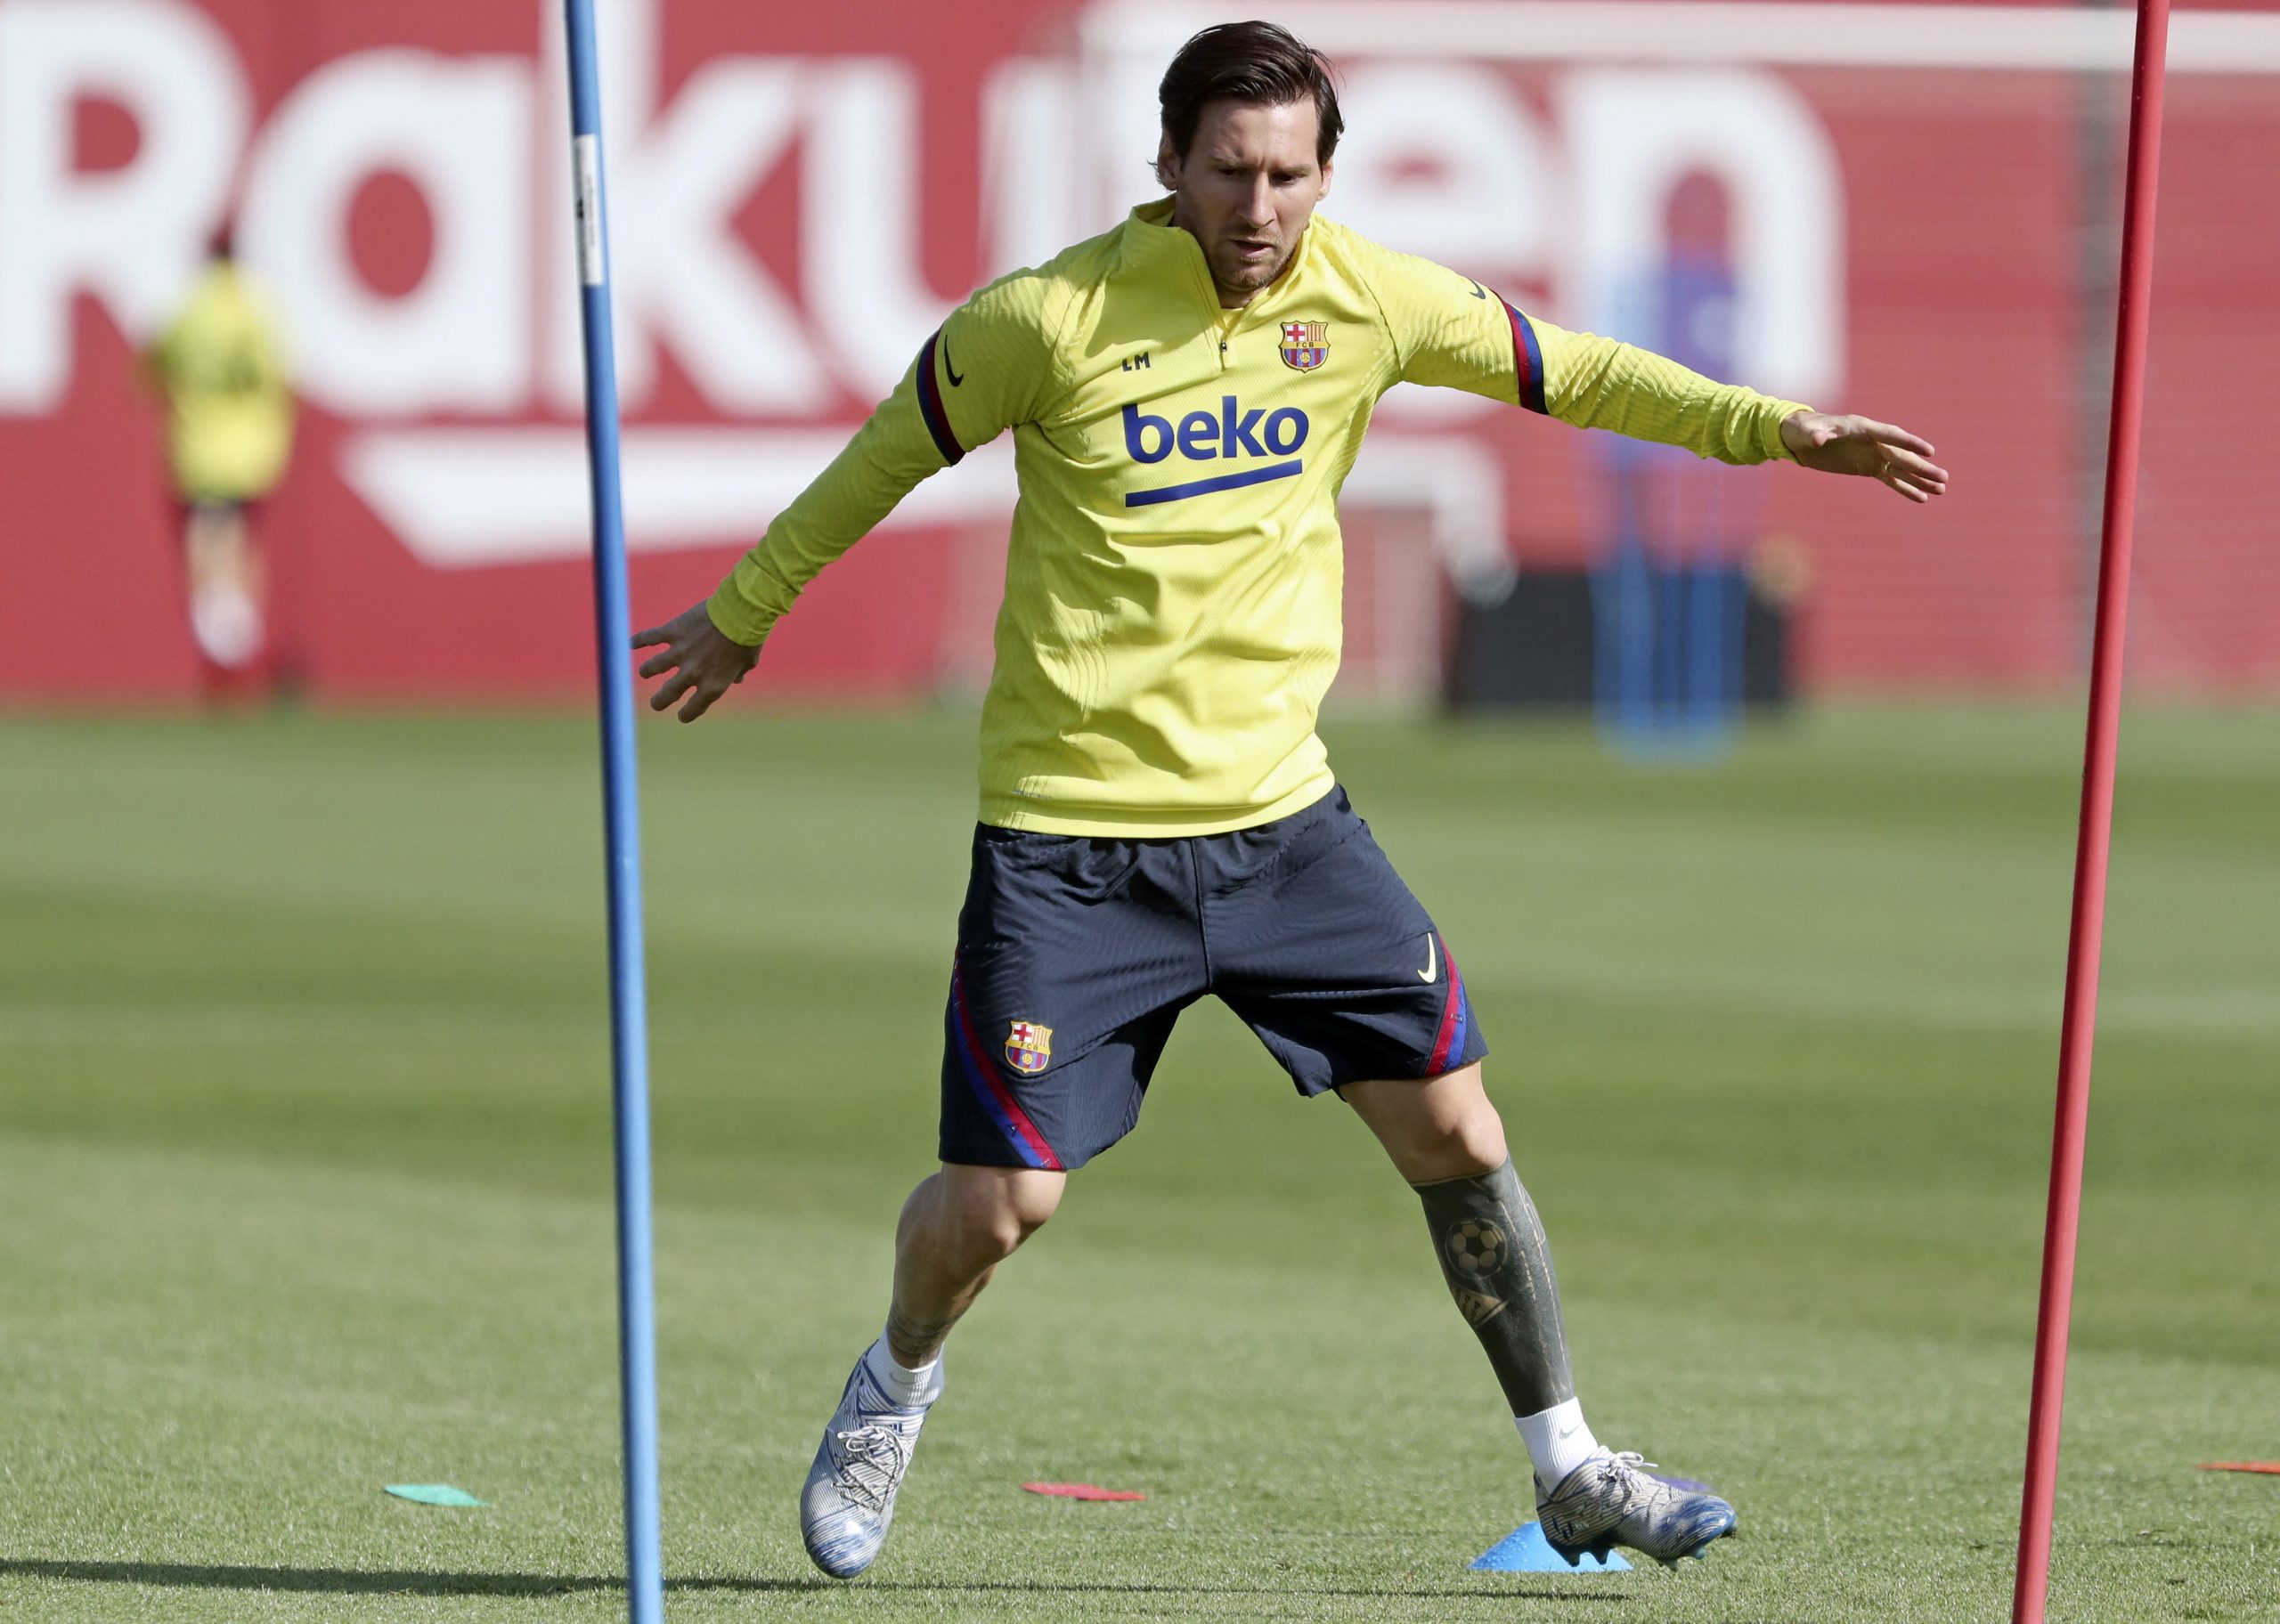 epa08424361 A handout picture made available by Spanish soccer team FC Barcelona shows FC Barcelona's Lionel Messi attending an individual training session at Joan Gamper sports city in Barcelona, Catalonia, Spain, 15 May 2020. FC Barcelona returned to training last Friday 08 May 2020 after 56 days following the outbreak of COVID-19. Team's members were tested on 06 May 2020 ahead of the first phase of the individual training sessions amid the de-escalation process.  EPA/MIGUEL RUIZ / FC BARCELONA HANDOUT HANDOUT HANDOUT EDITORIAL USE ONLY/NO SALES